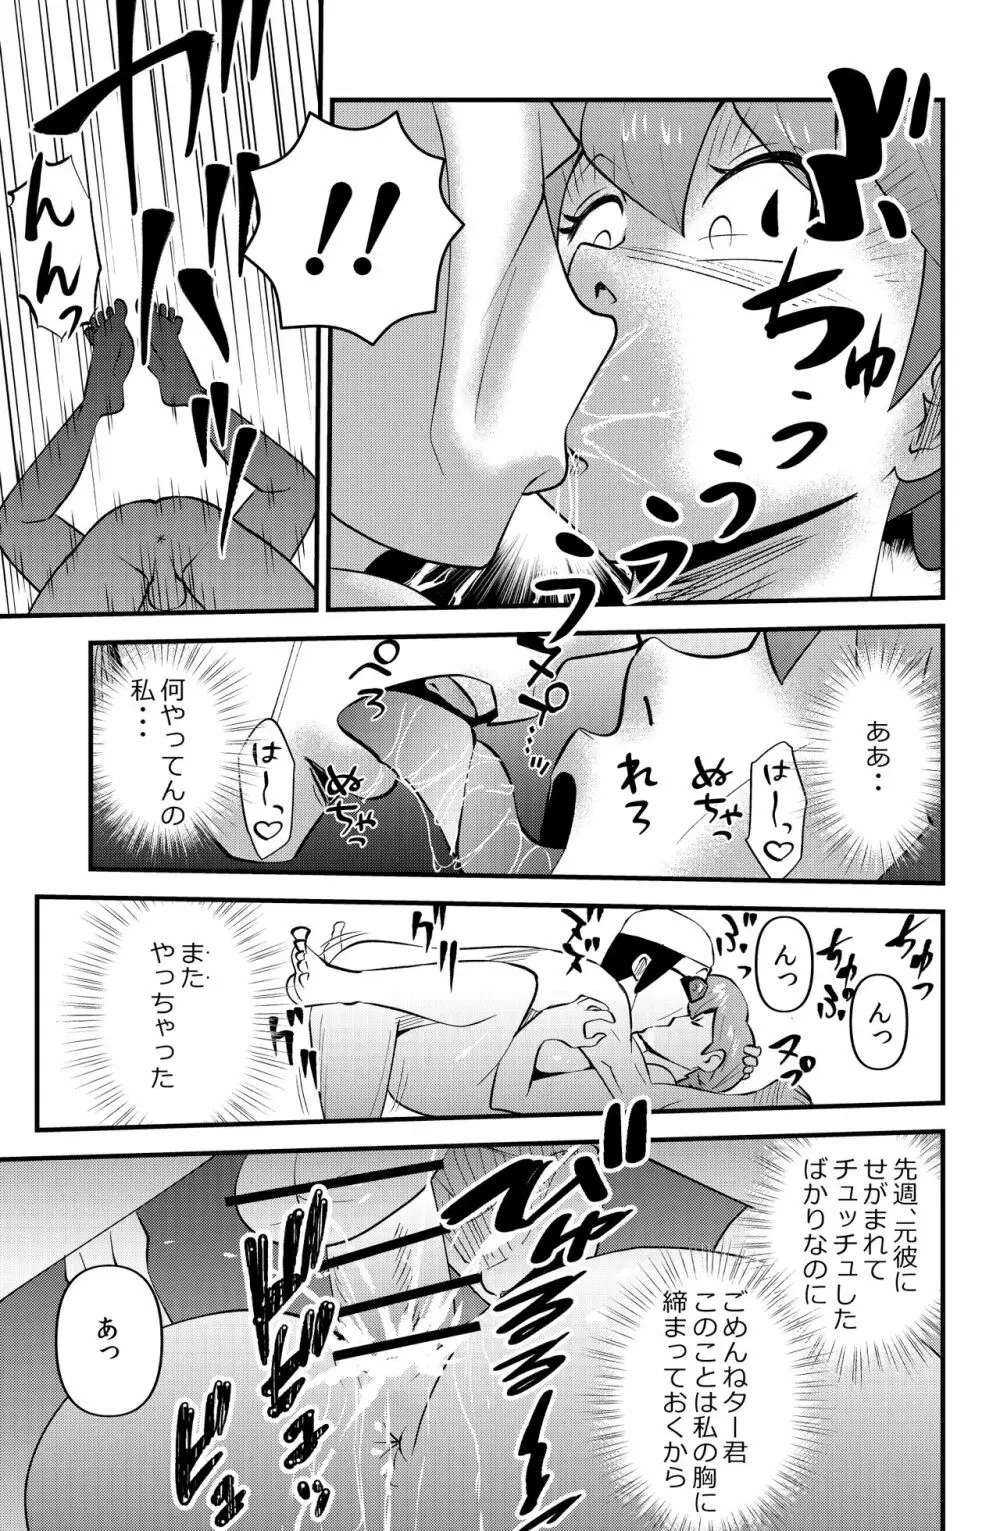 ＪＫは水泳部でダイエットする - page19